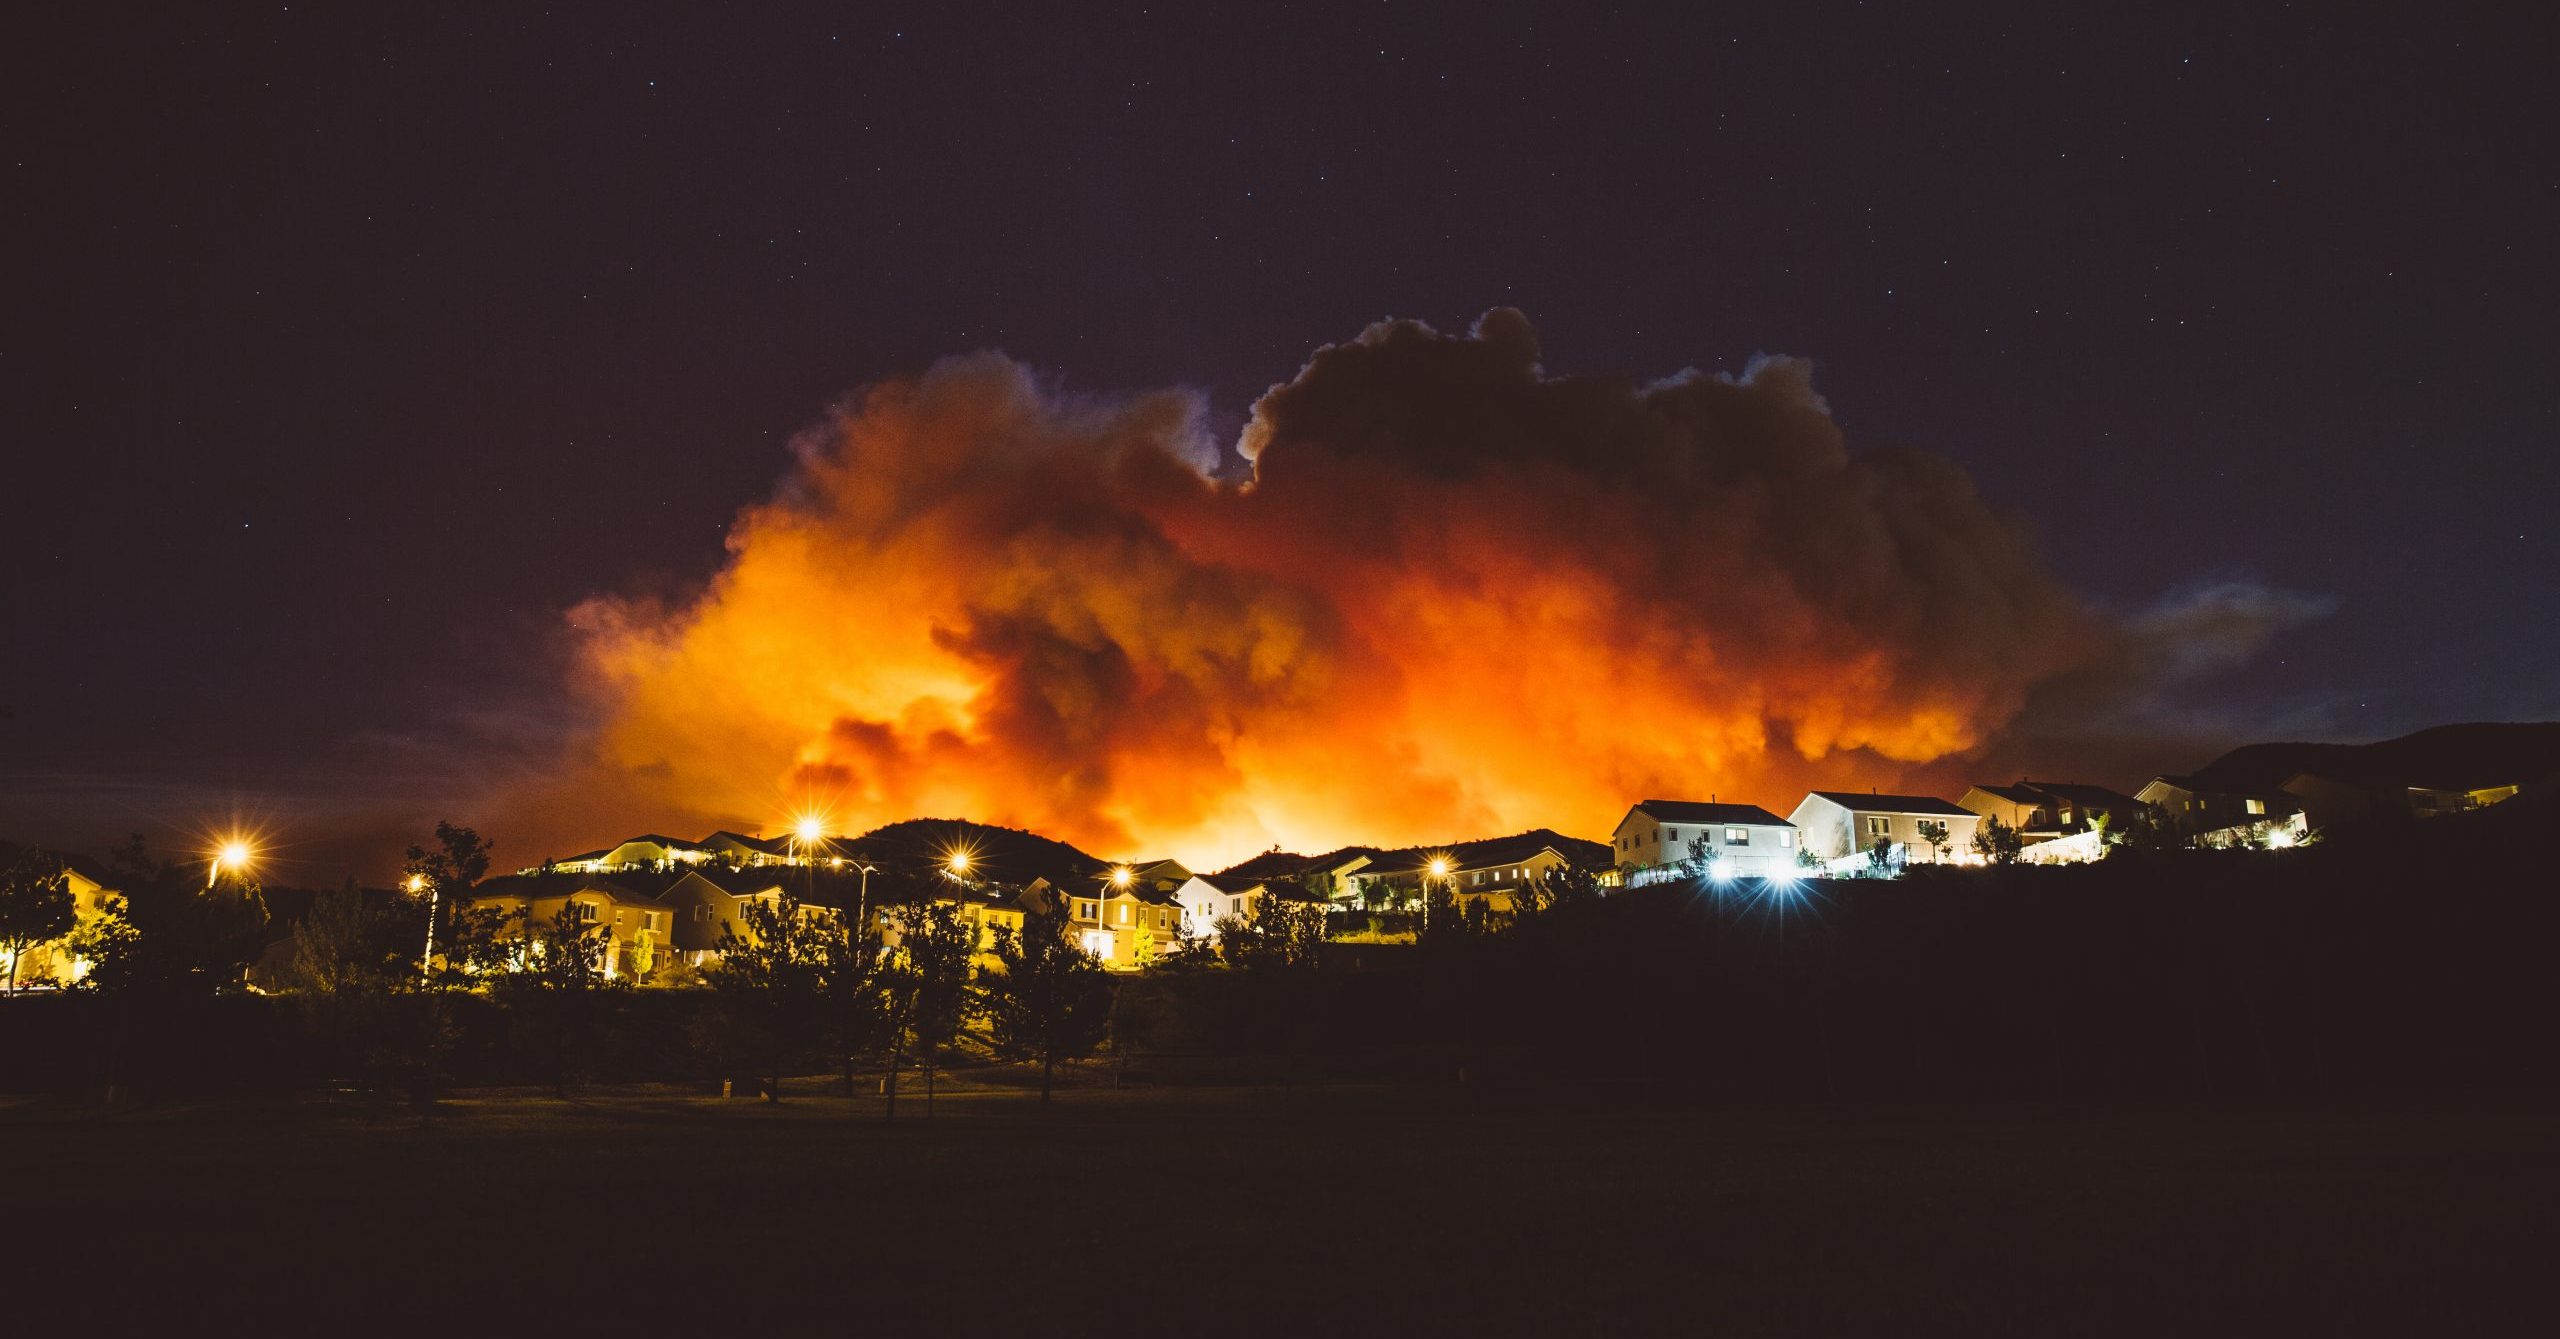 Storage Newsletter: DriveSavers to Aid Southern California Wildfire Victims